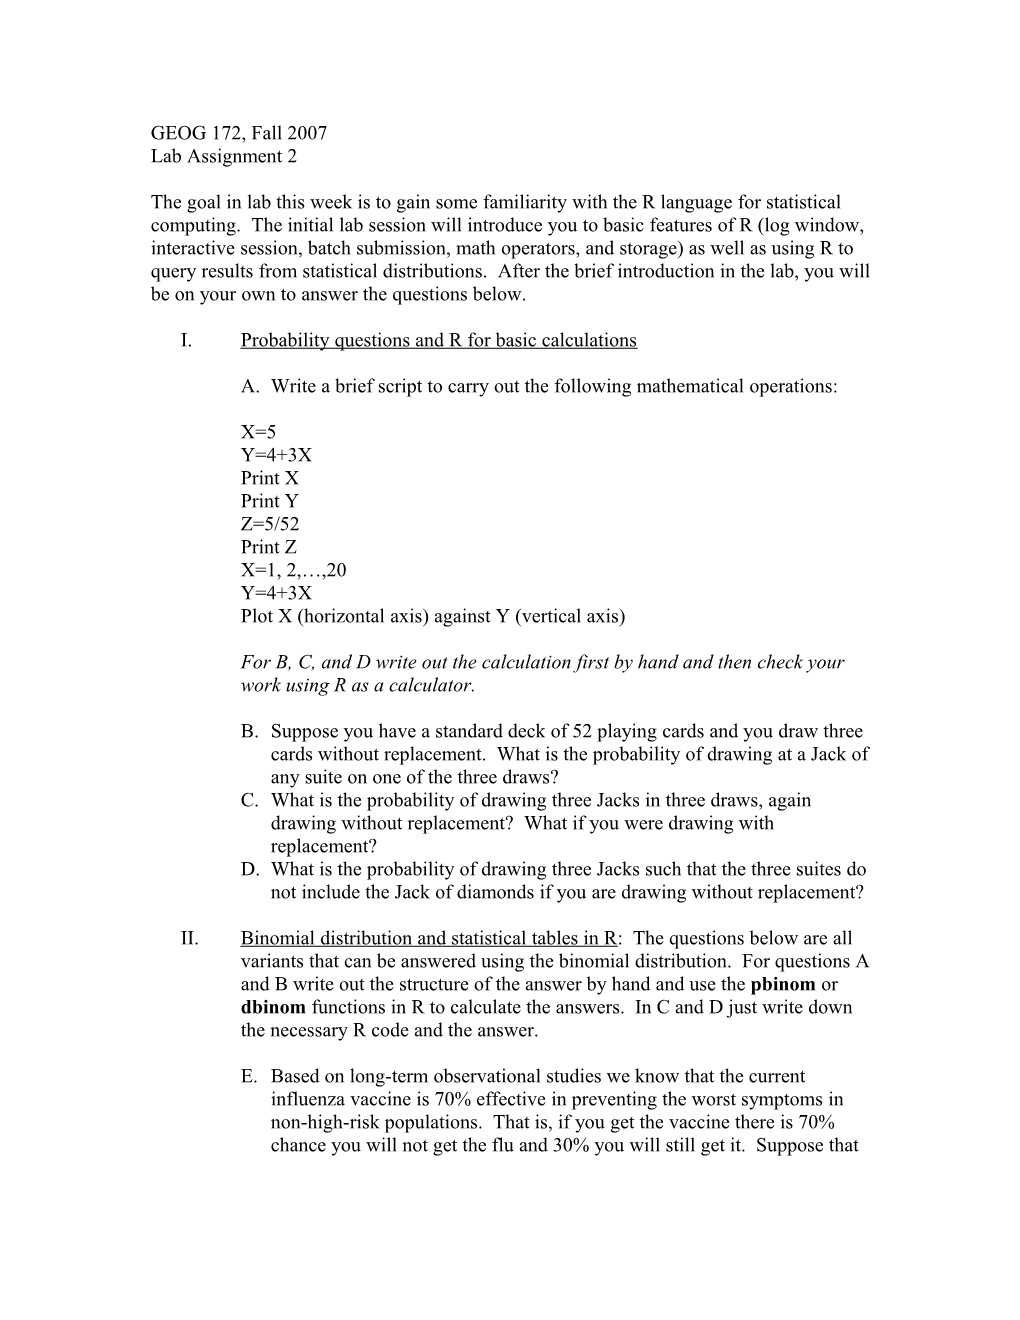 I.Probability Questions and R for Basic Calculations